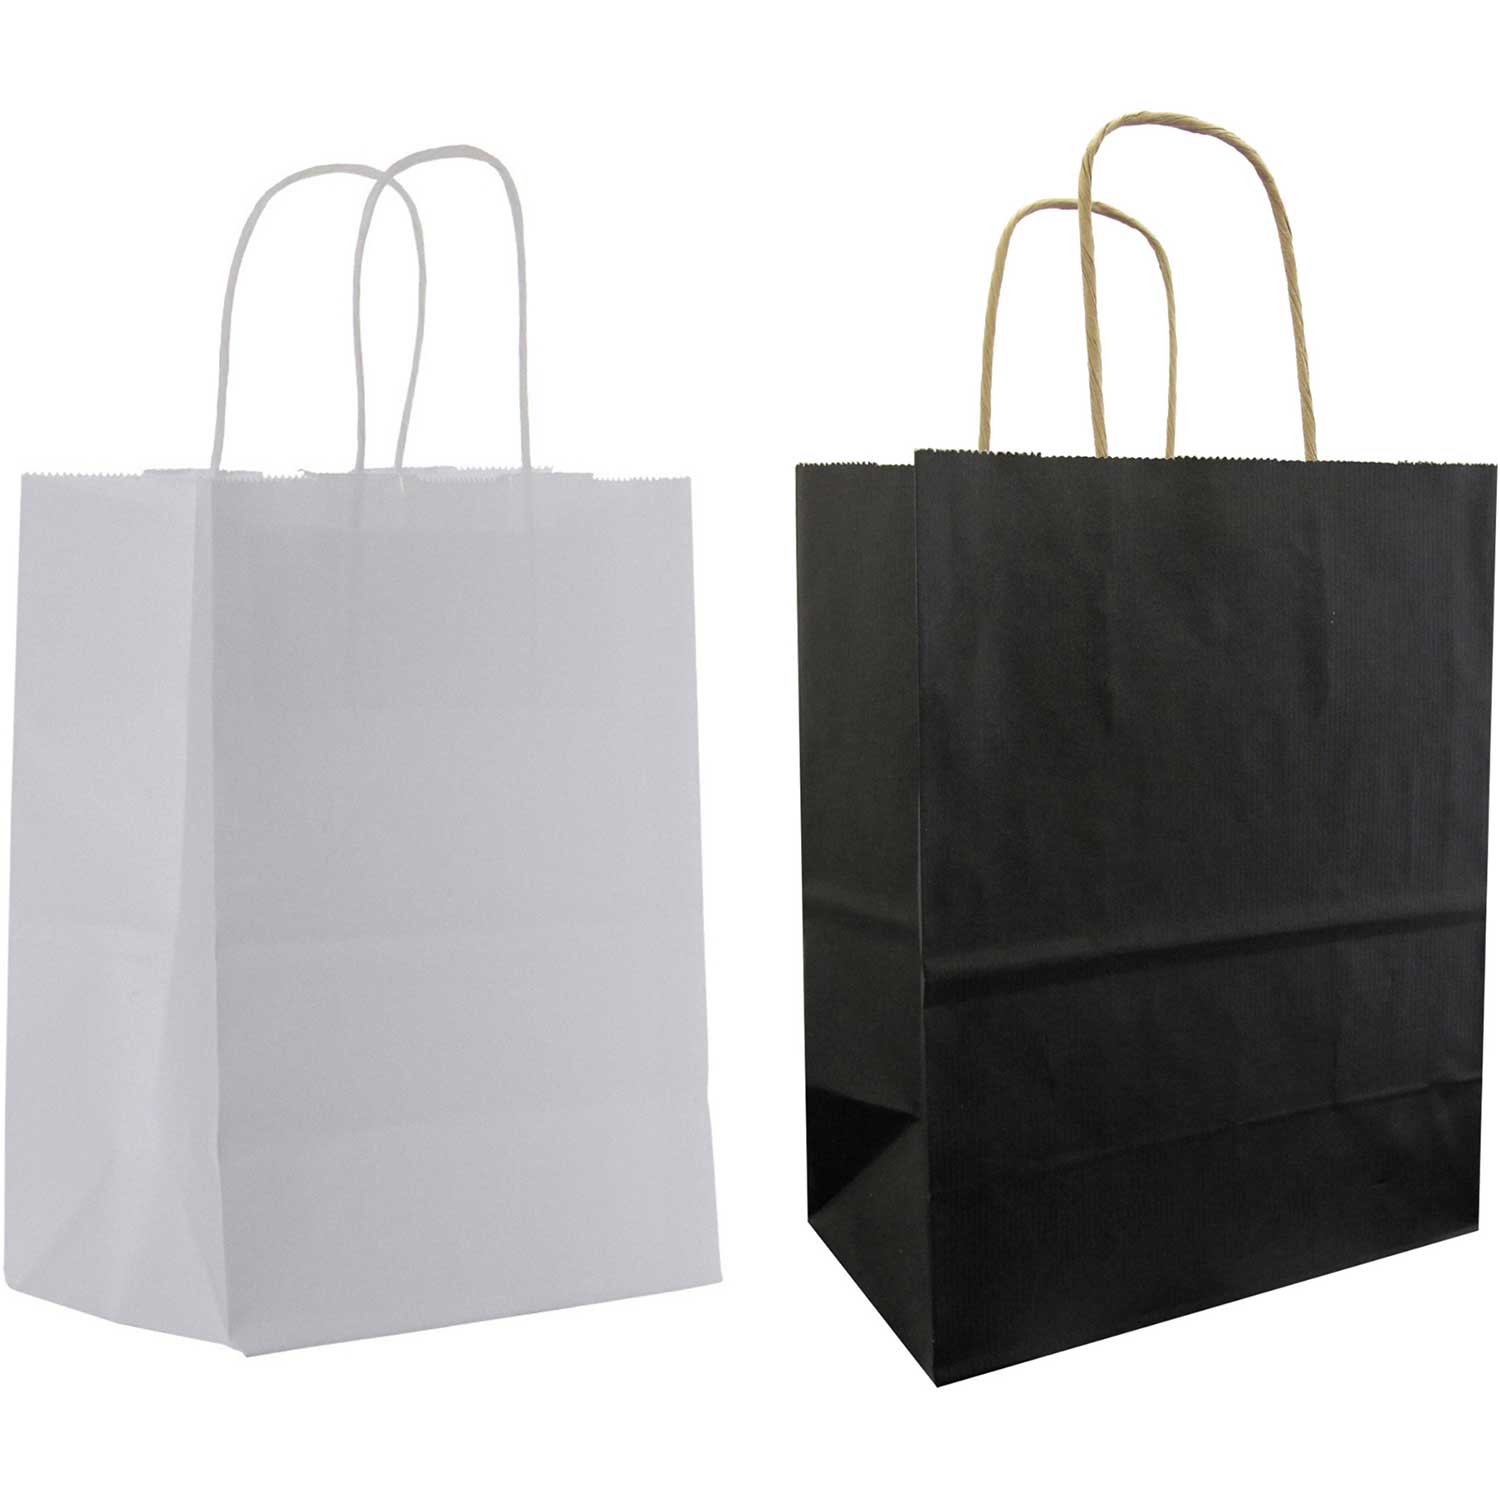 All Occasion Black & White Kraft Medium Solid Totes (12 Pack)